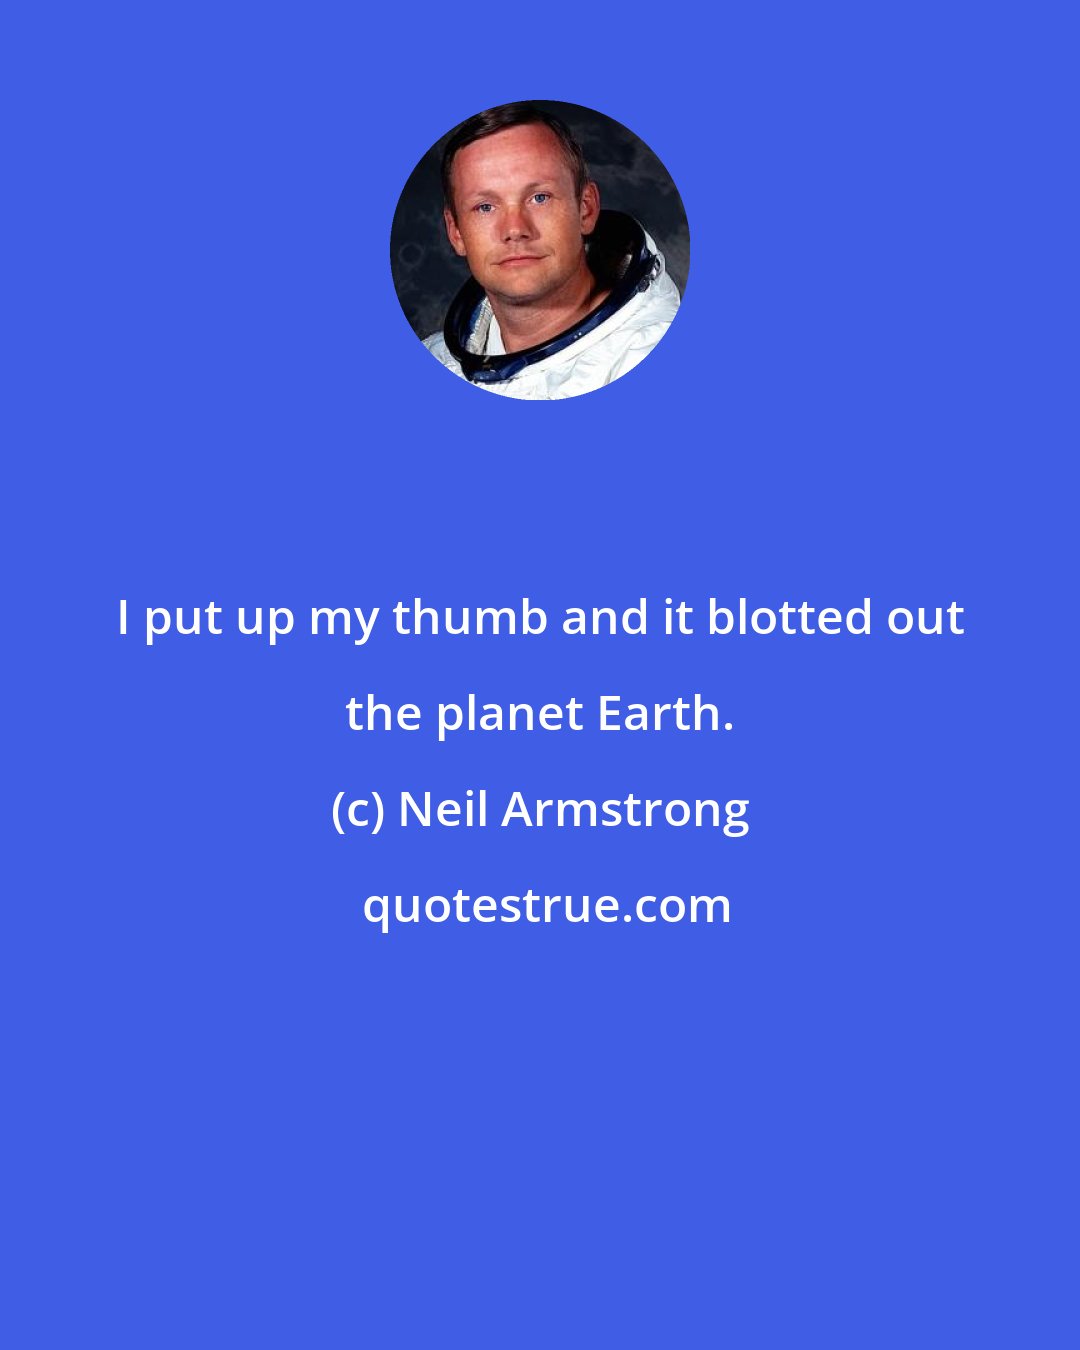 Neil Armstrong: I put up my thumb and it blotted out the planet Earth.